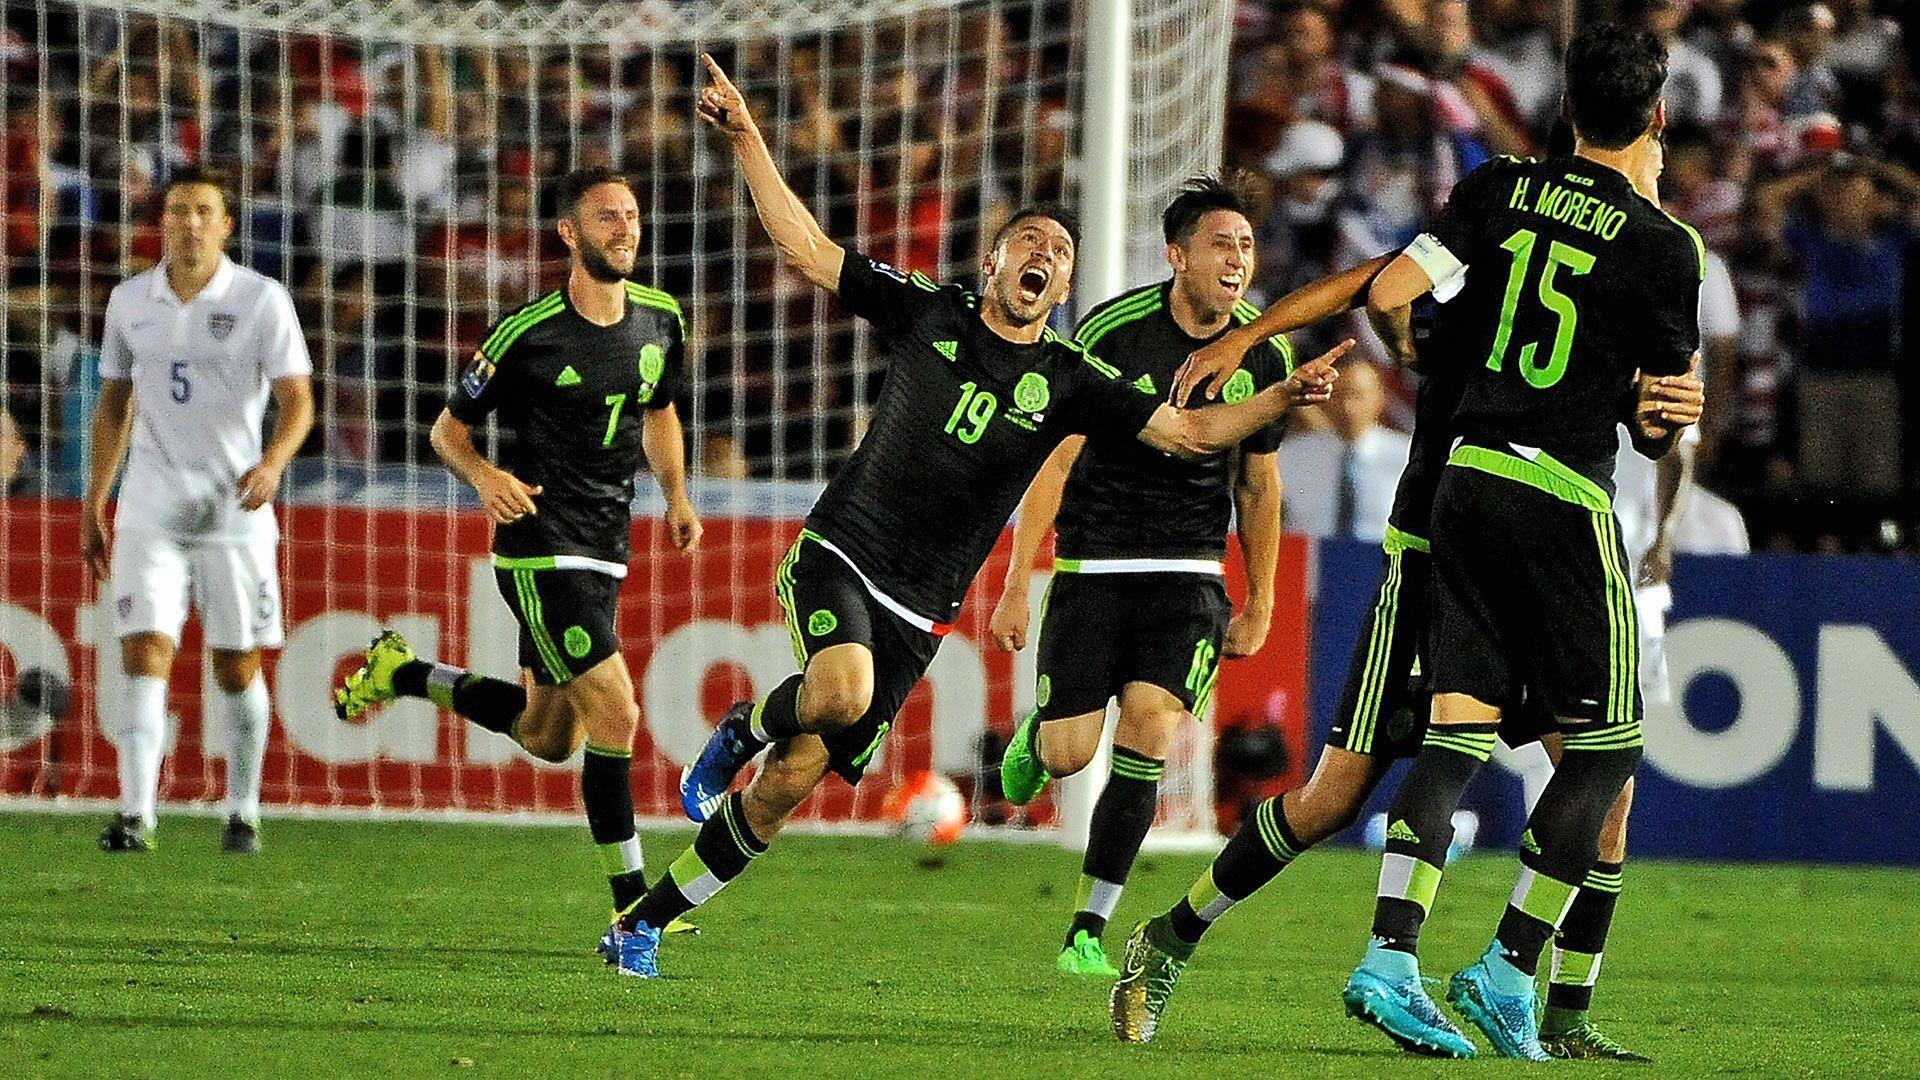 Best photo from USA vs. Mexico in Confederations Cup playoff